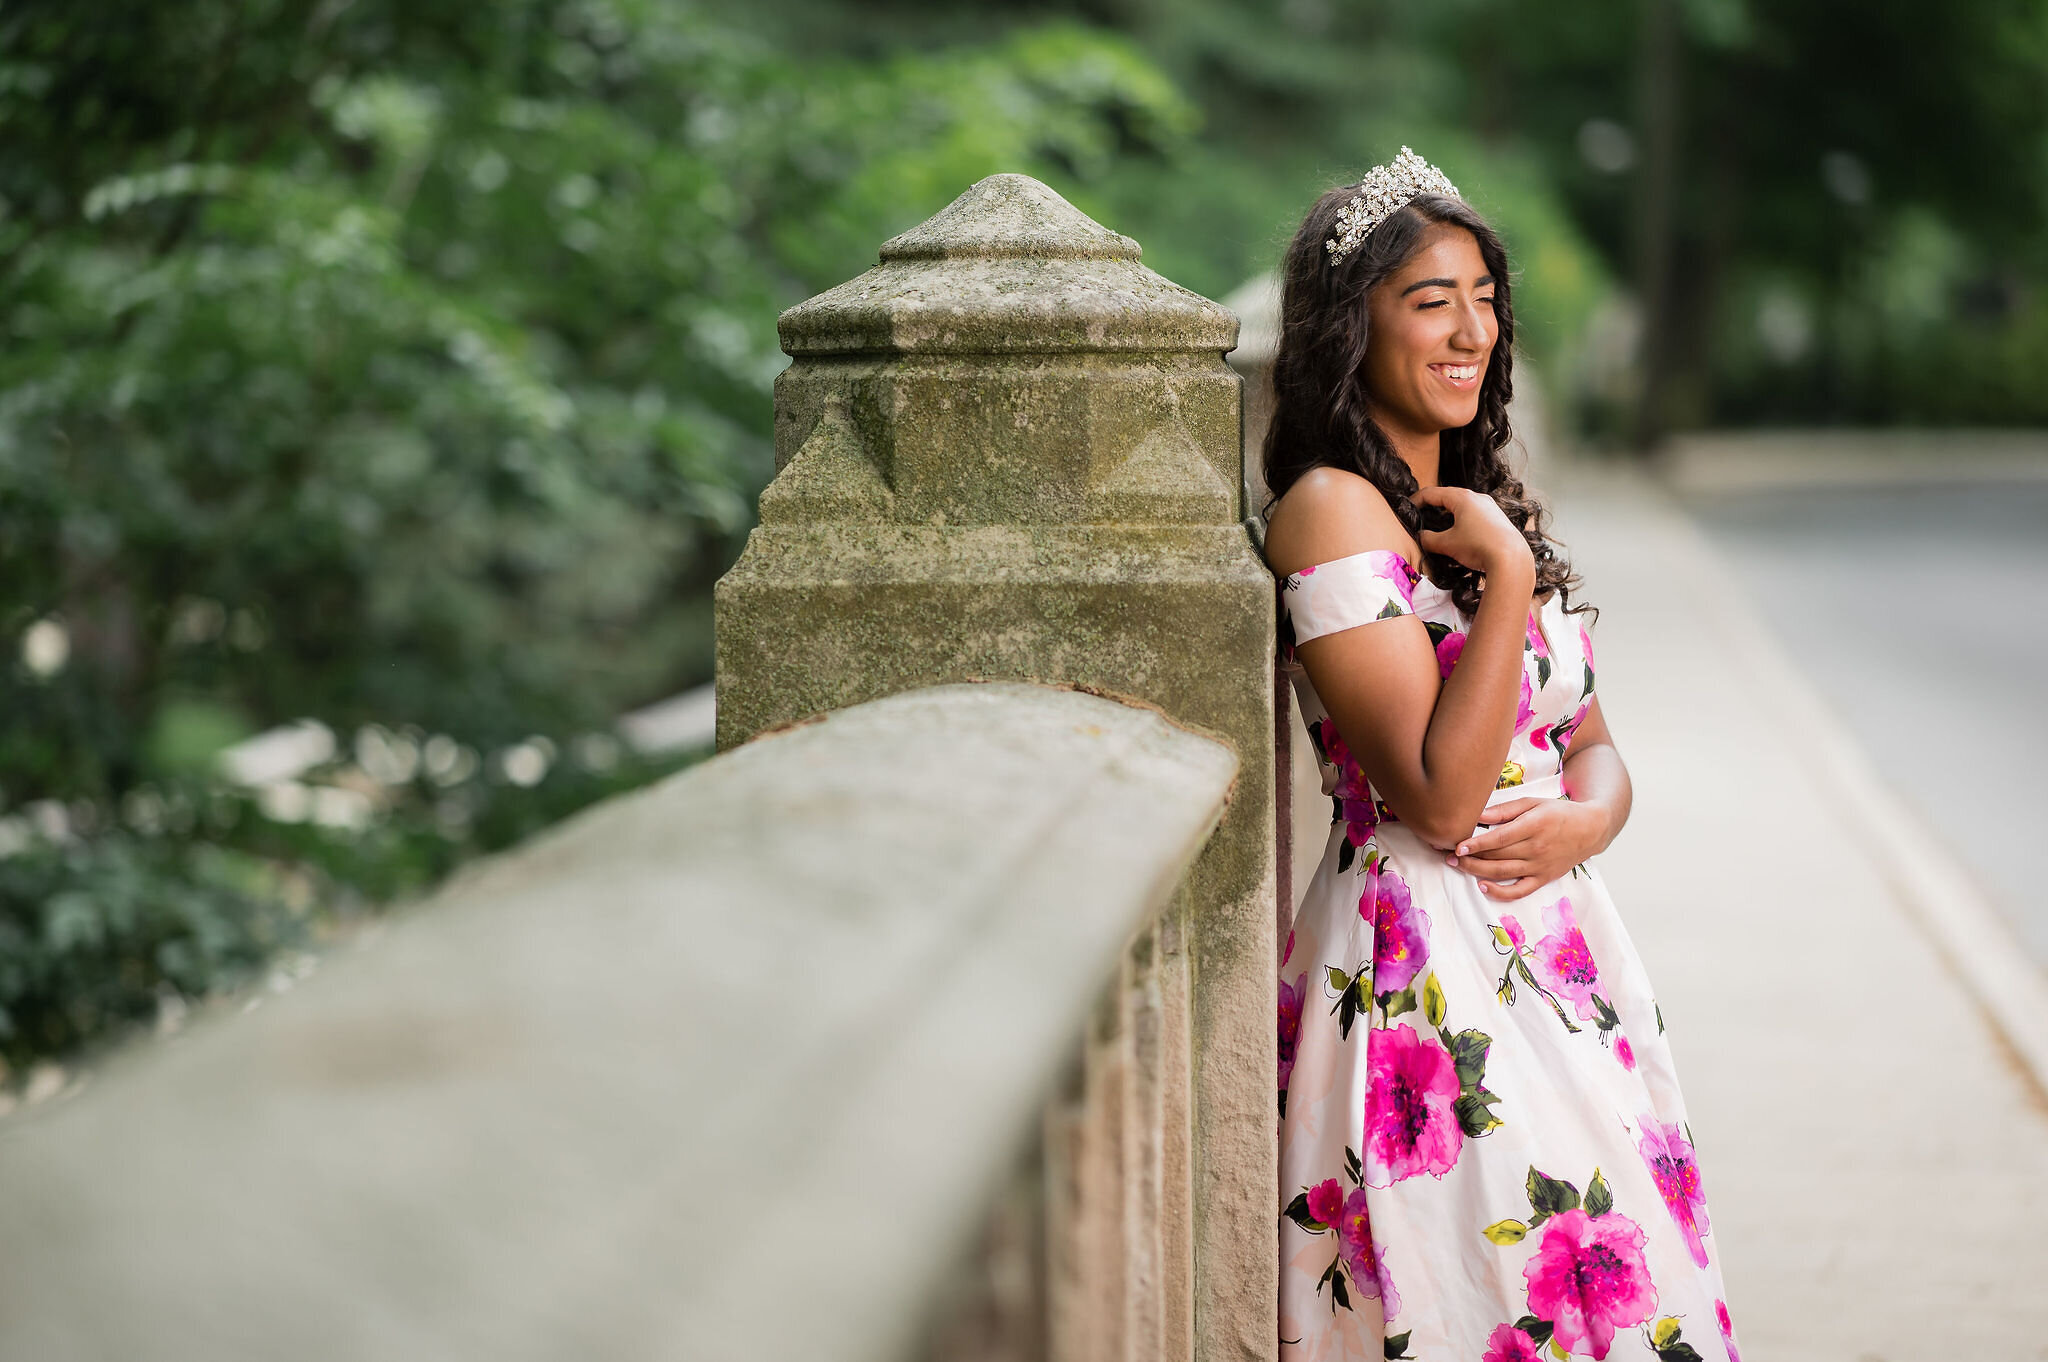 Emily-Quince-Session-Garcia-Photography-7726.jpg